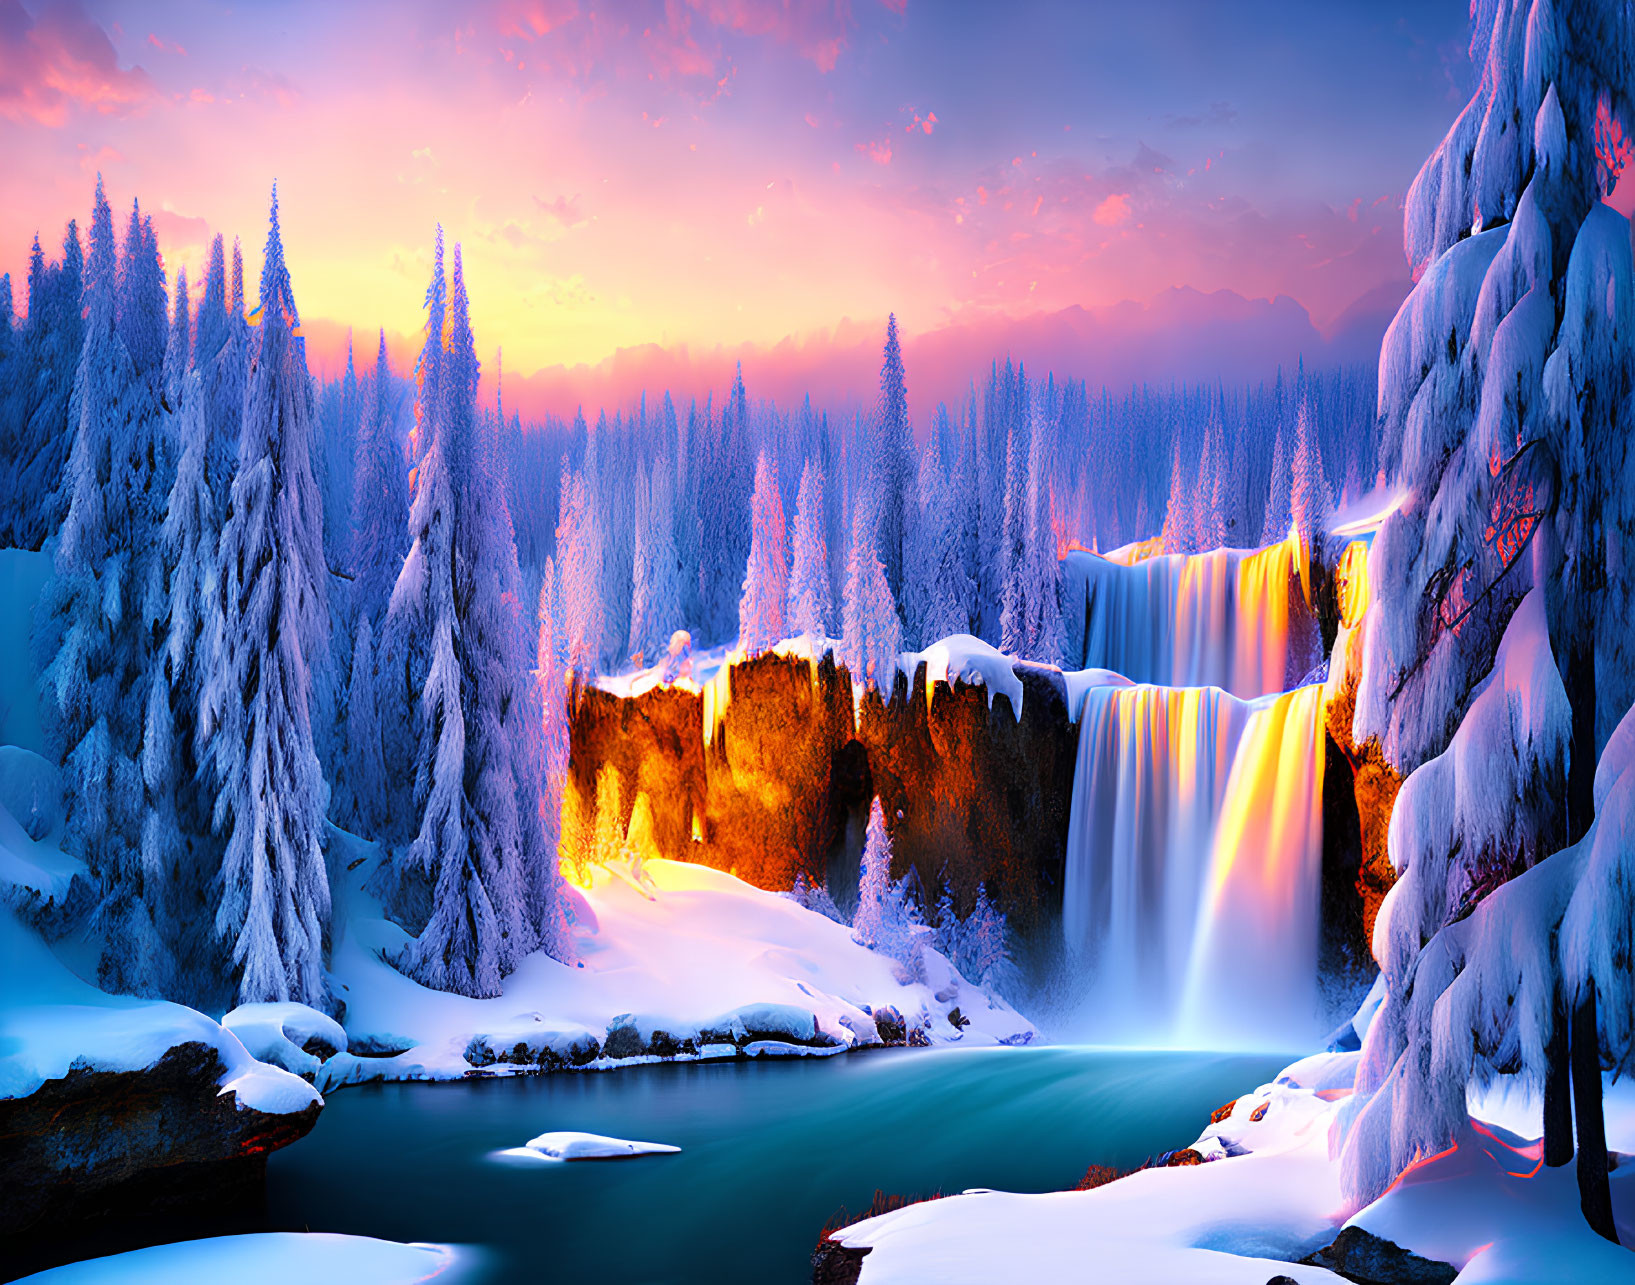 Scenic snowy landscape with sunset, waterfall, river, and pine trees